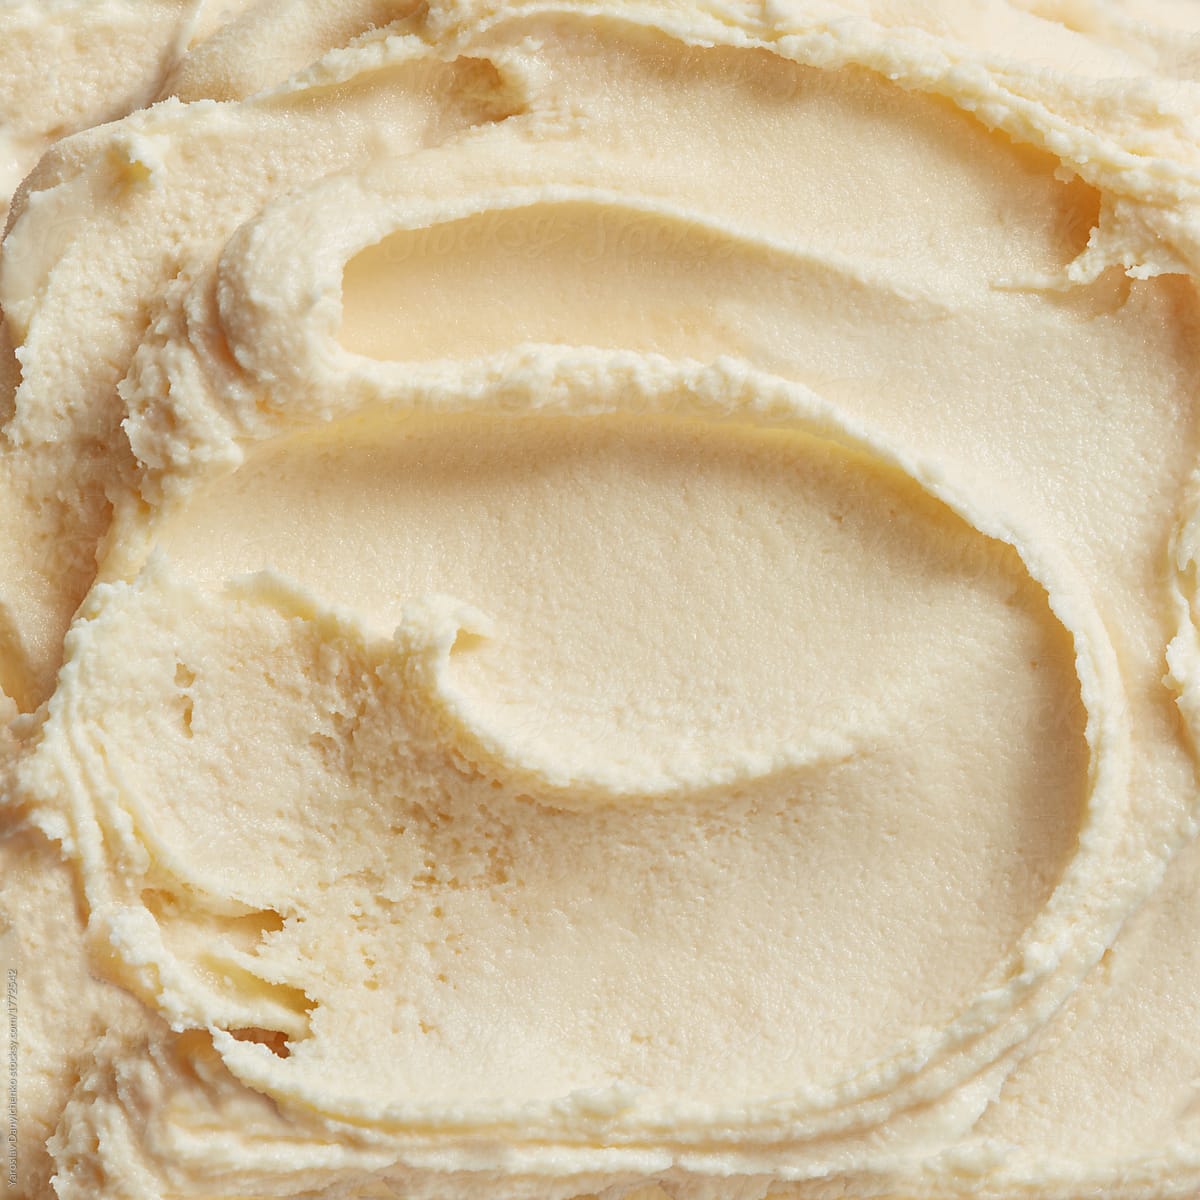 Texture Analysis Professionals Blog: Is your Ice Cream Tub at the Top of  the Stack?